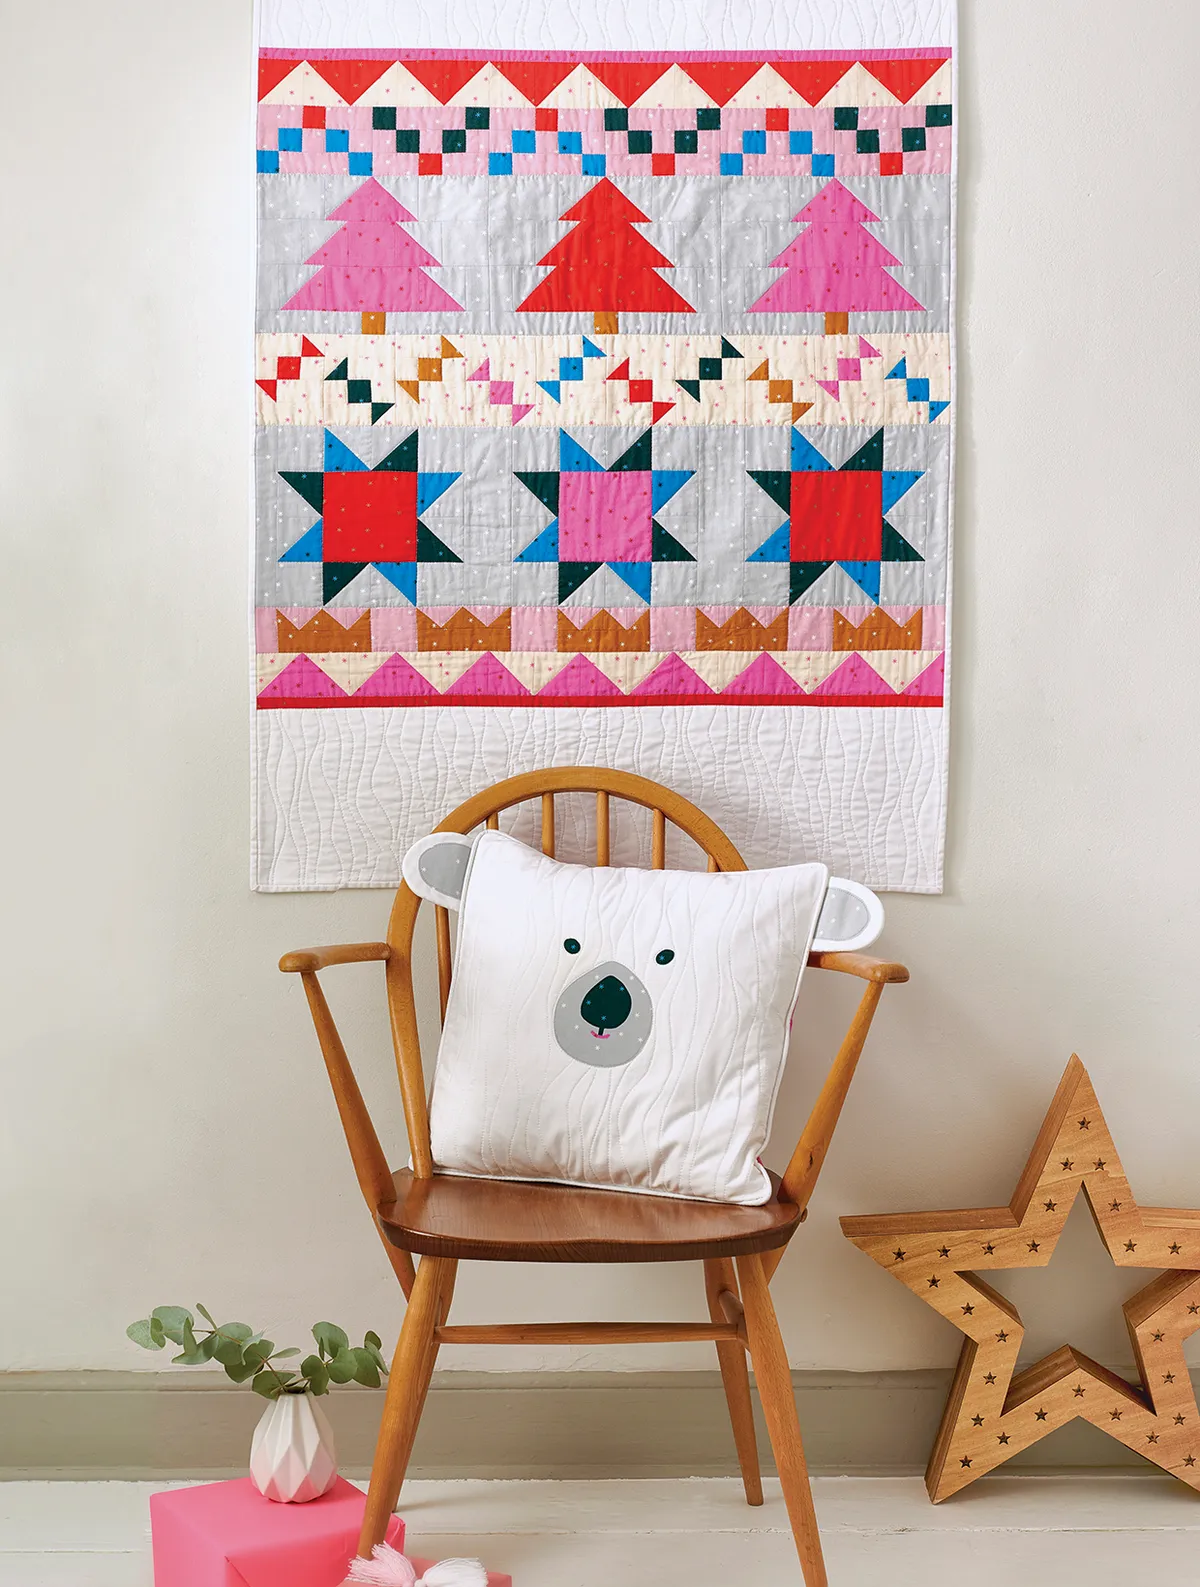 How to make a Christmas quilt